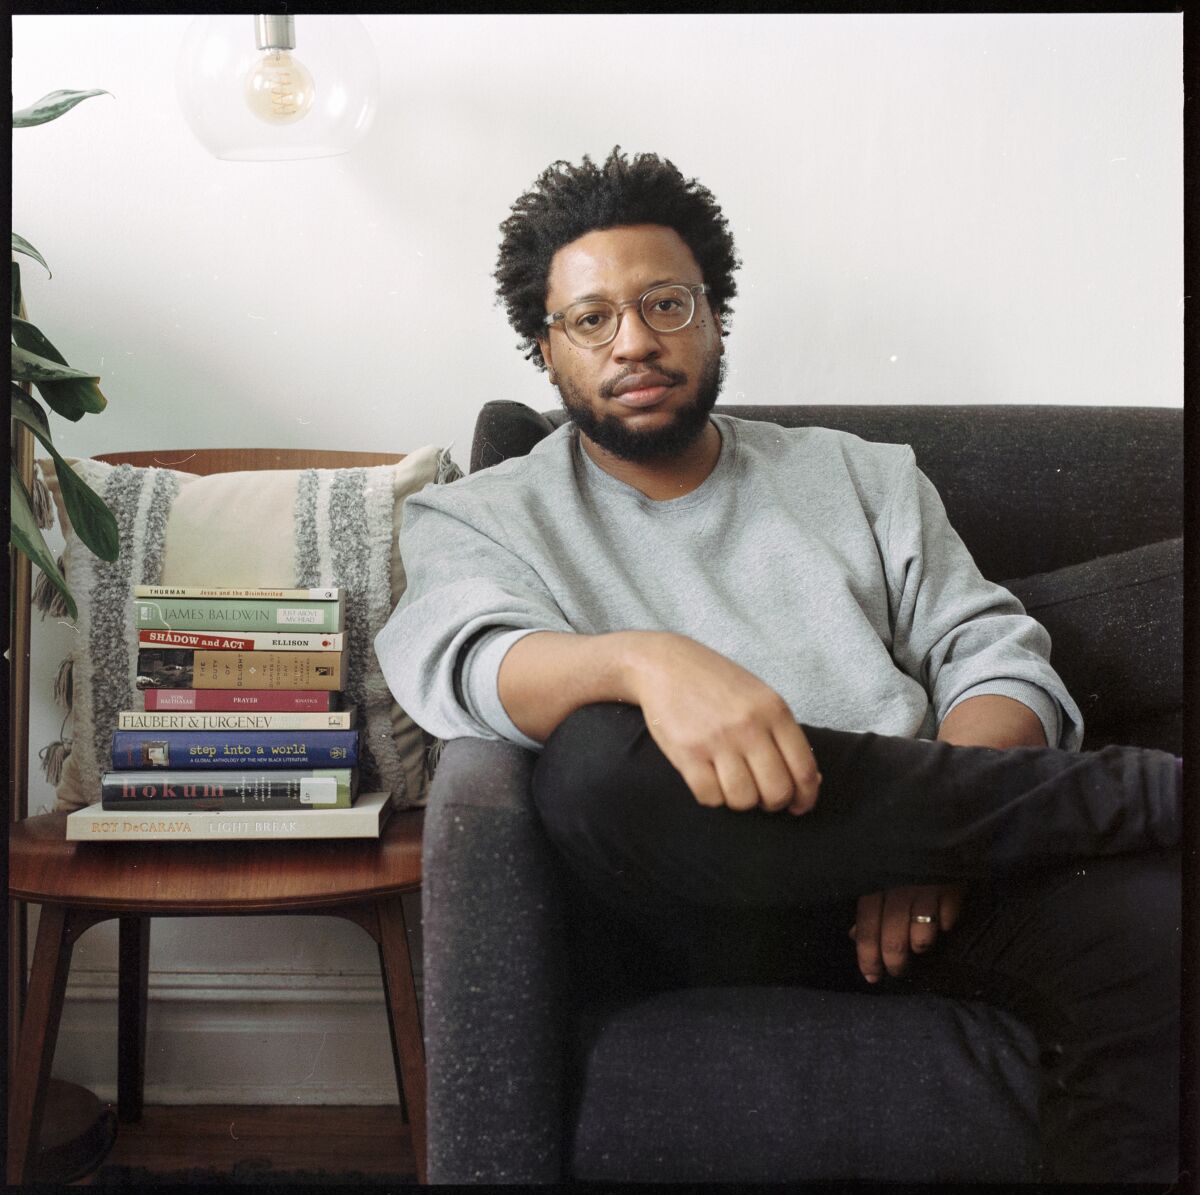 Vinson Cunningham sits on a couch next to a stack of books.